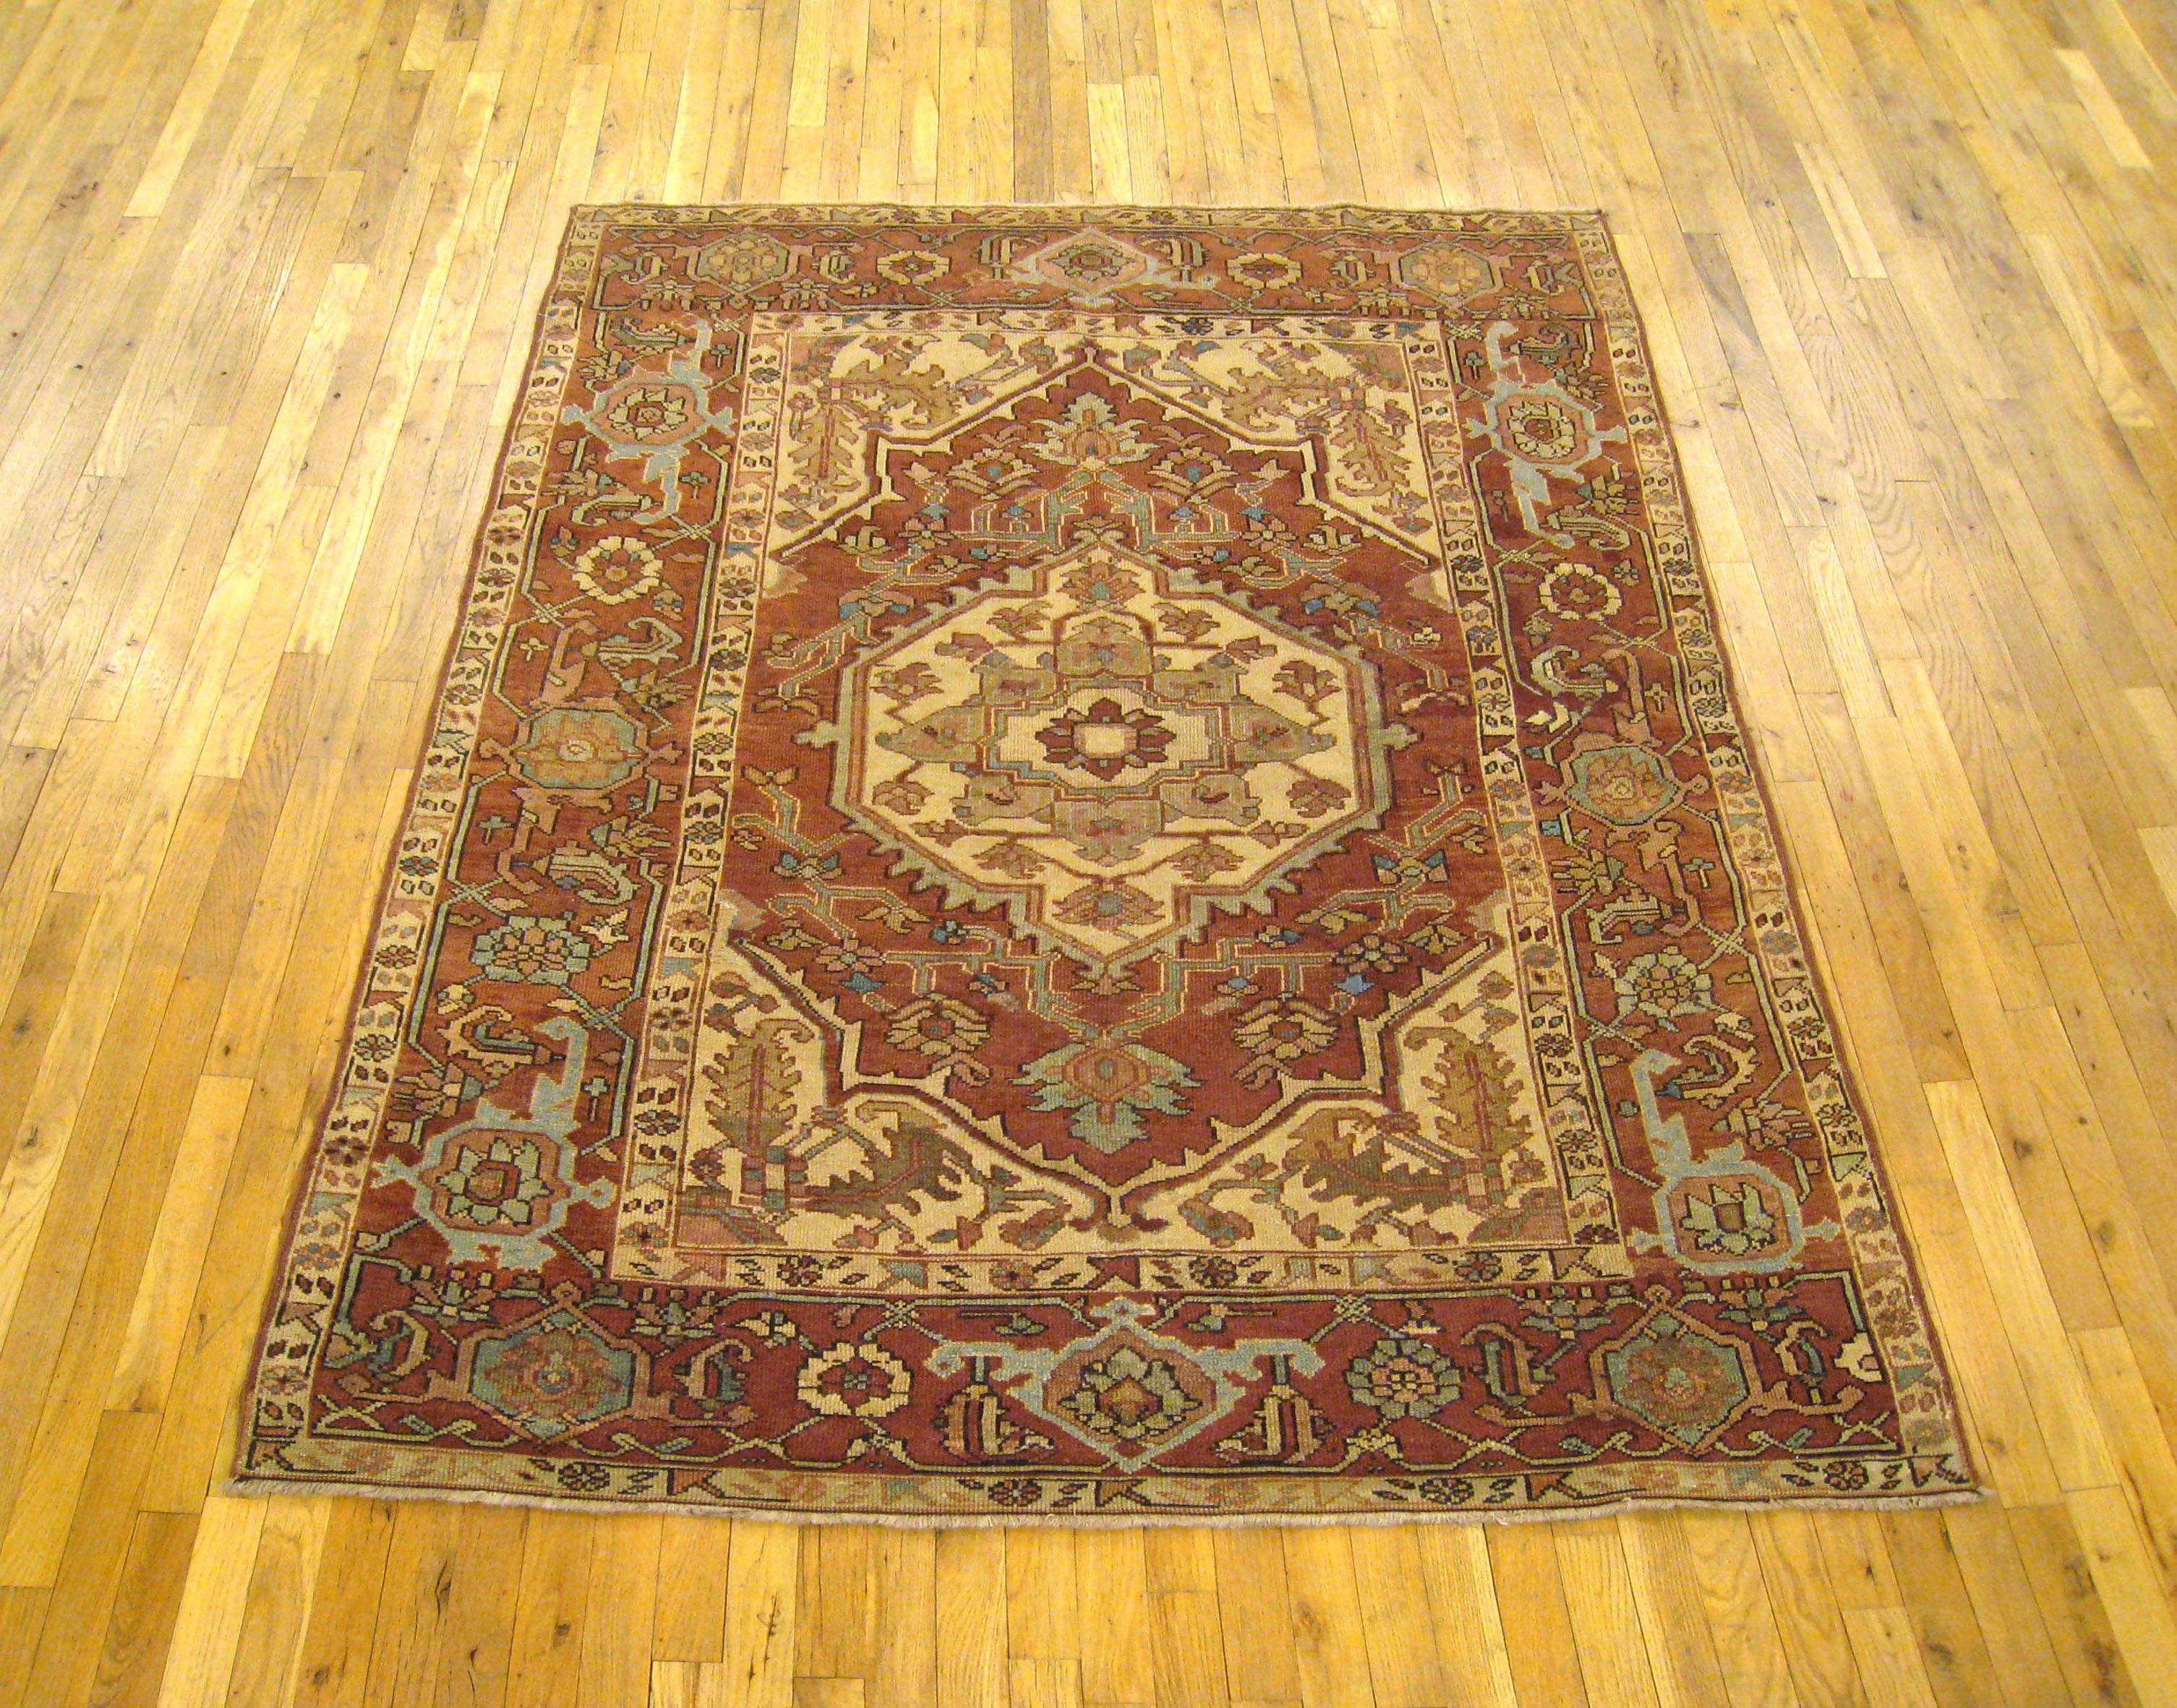 An antique Persian Serapi oriental rug, size 6'2 x 5'0, circa 1900. This handsome hand-knotted wool rug features a rare ivory field at center, with soft reds, light blues, and other earth tones throughout the rest of the carpet. The central field is